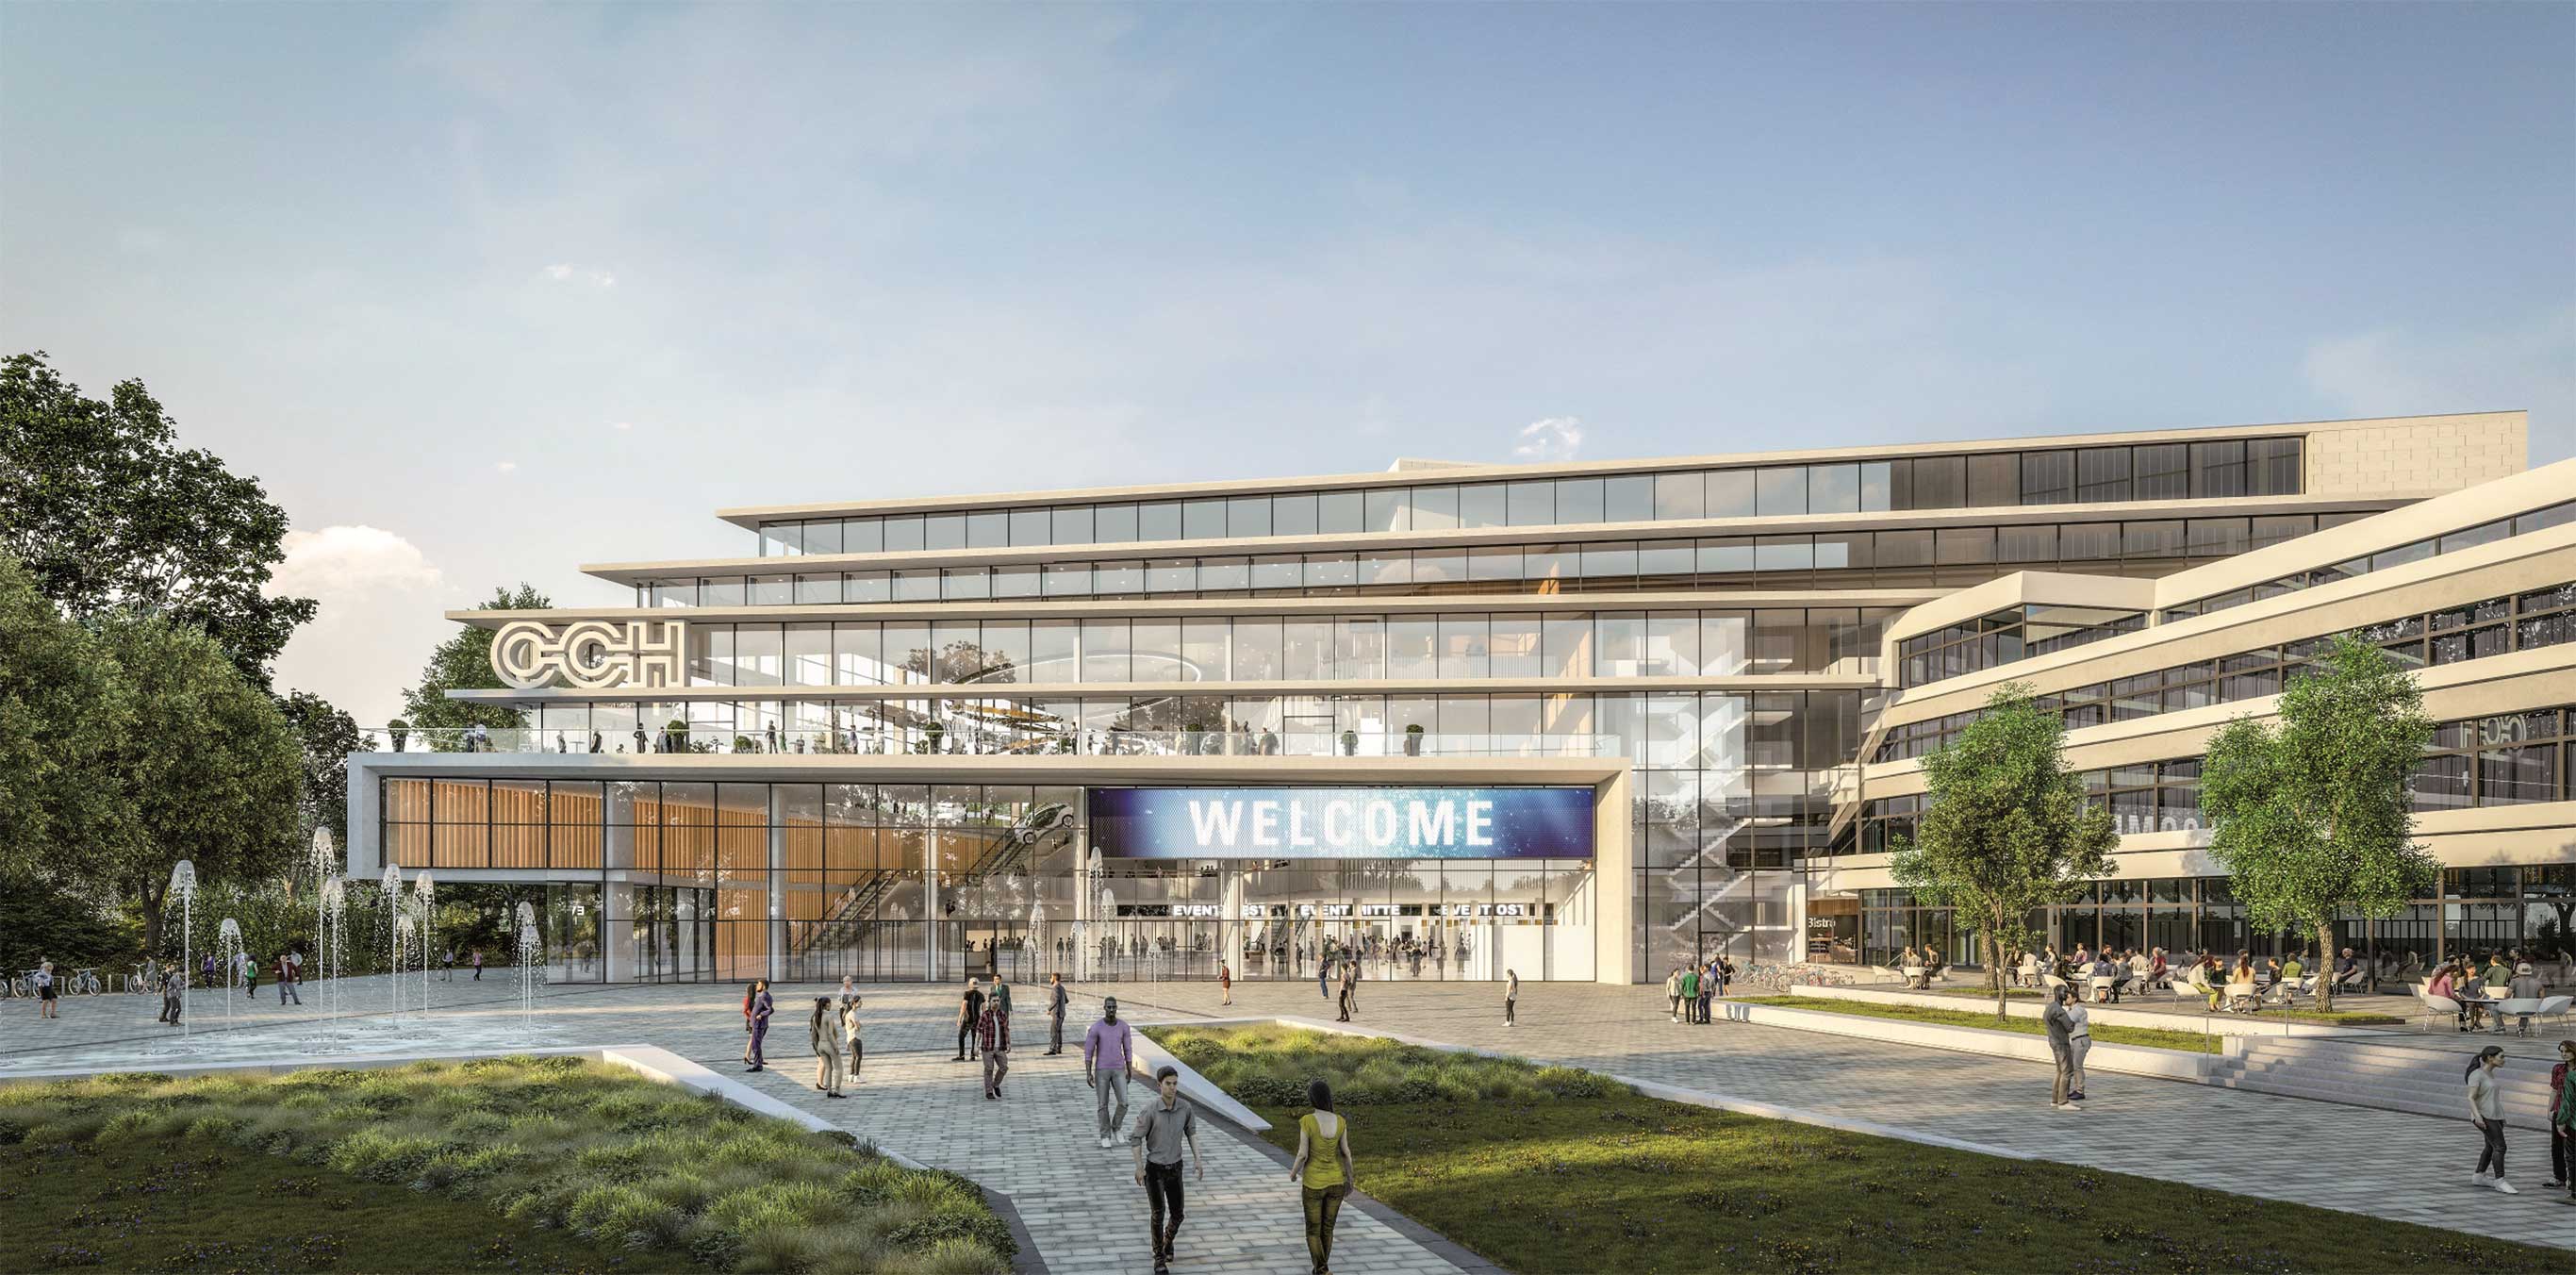 A conceptual design of the new CCH in Hamburg